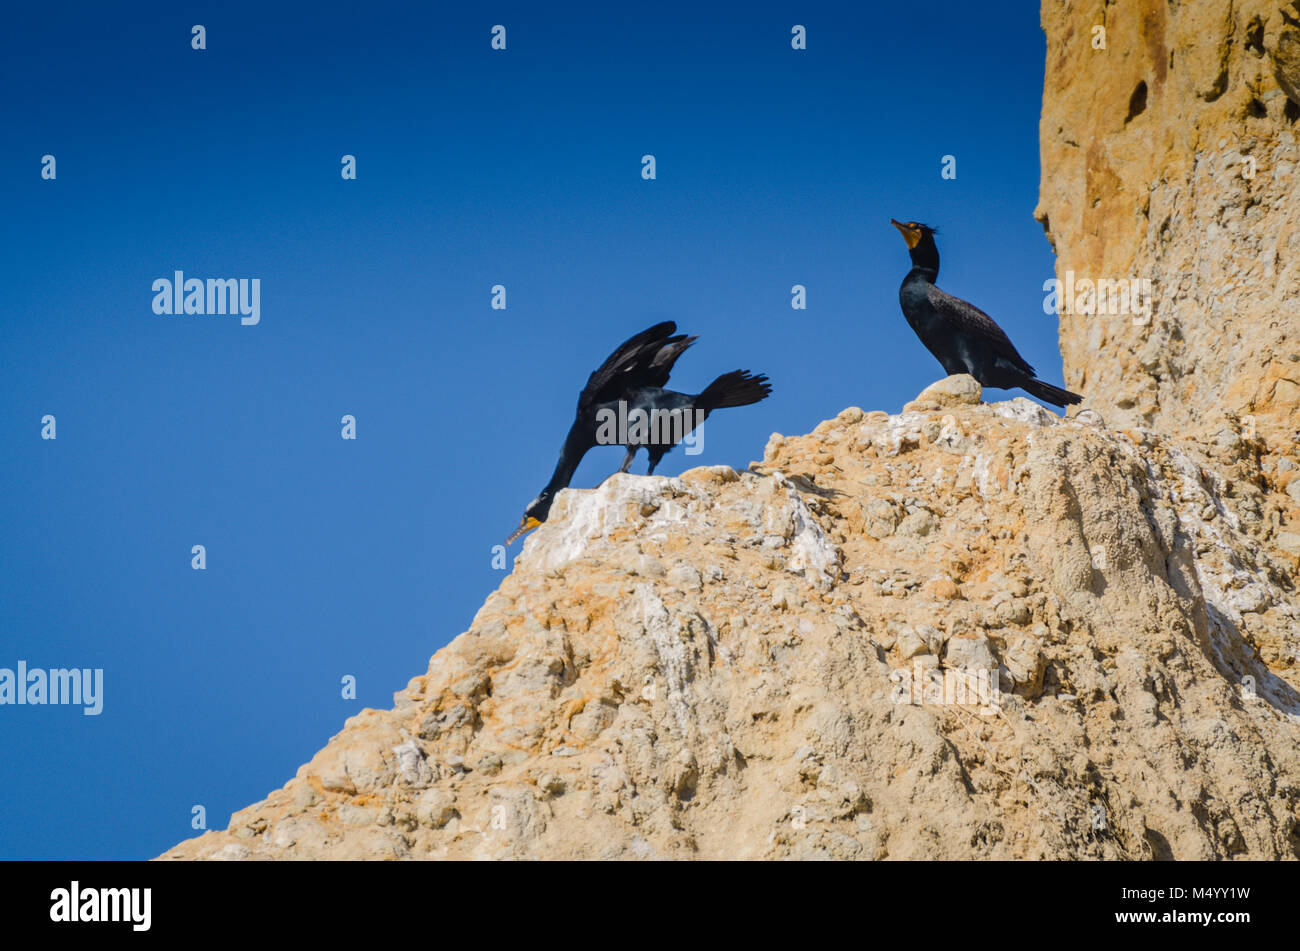 Pair of Brandt's Cormorant birds roosting on cliffs at Torrey Pines State Natural Preserve. Stock Photo